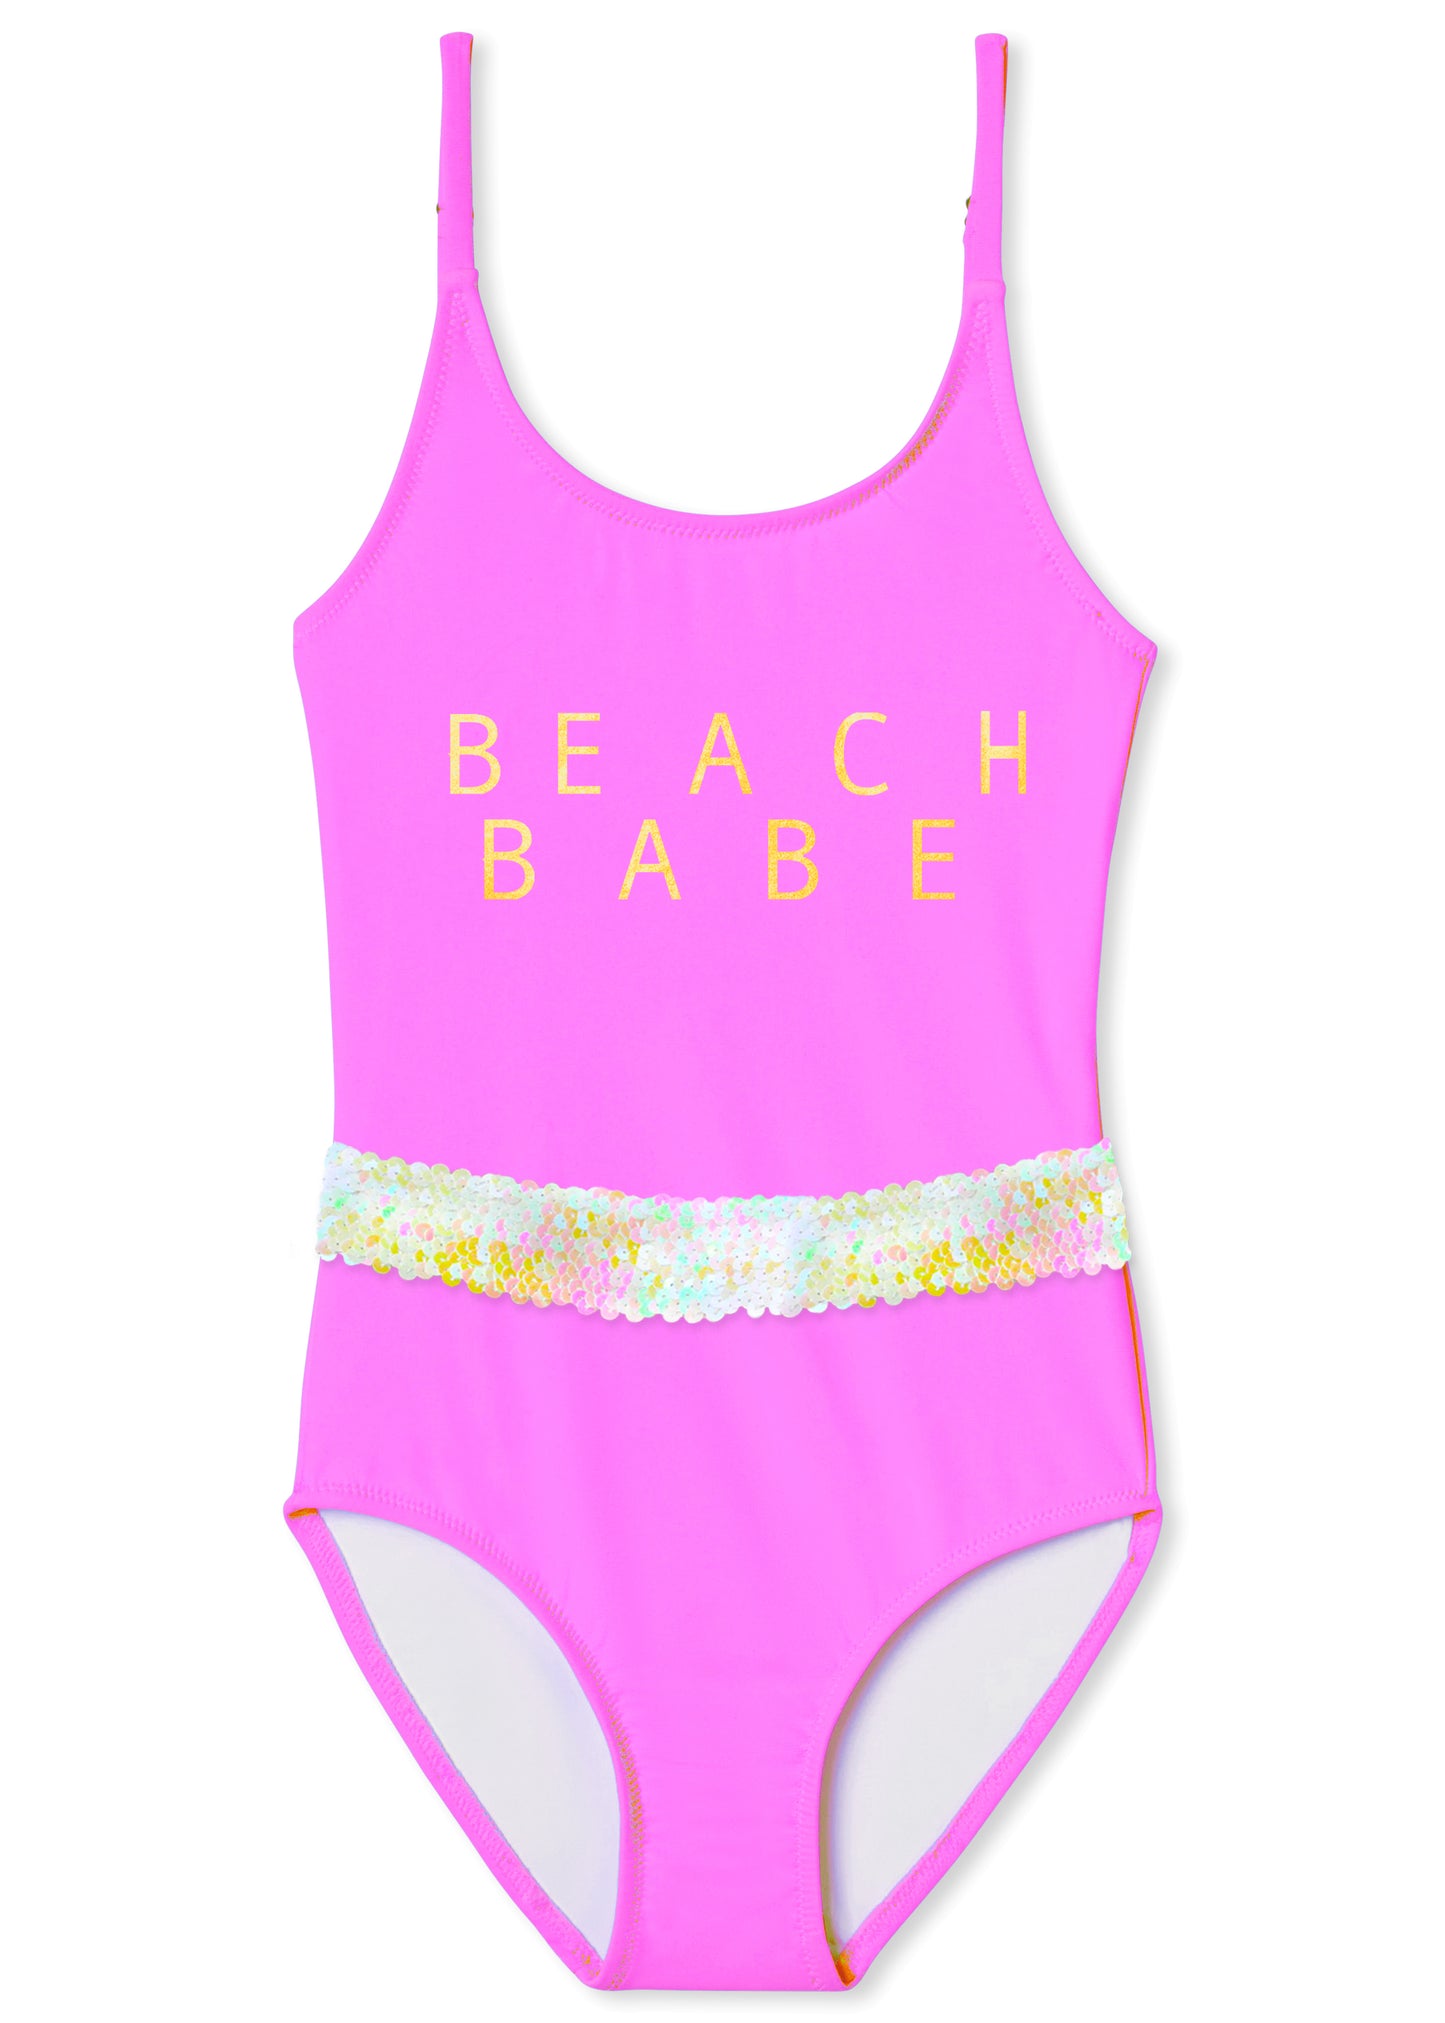 beachwear for girls, pink bathing suit for girls, cute swimsuits for girls